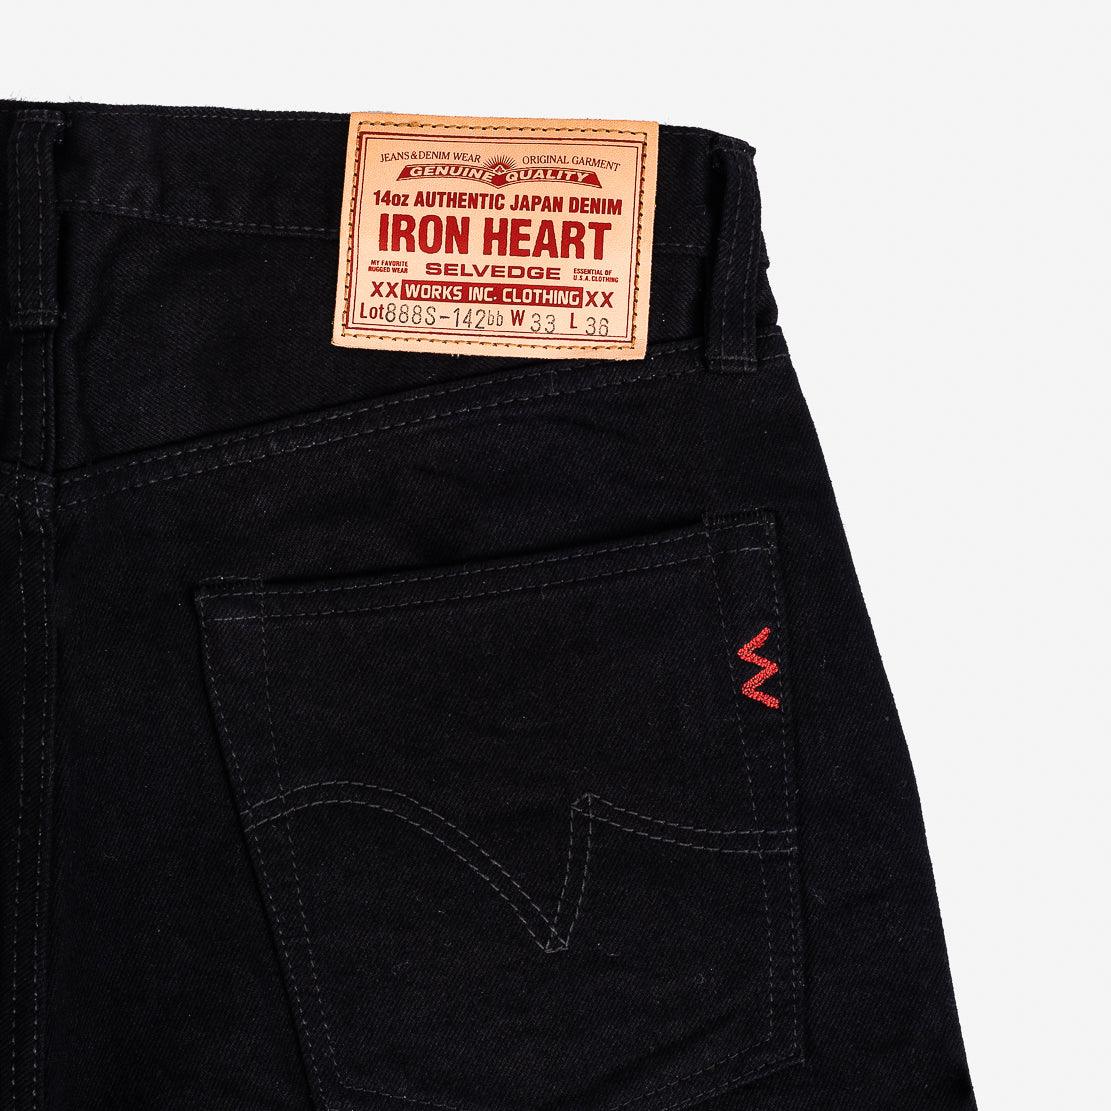 Iron Heart IH-888S-142bb 14oz Selvedge Denim Med/High Rise Tapered Cut Jeans - Black/Black - Guilty Party